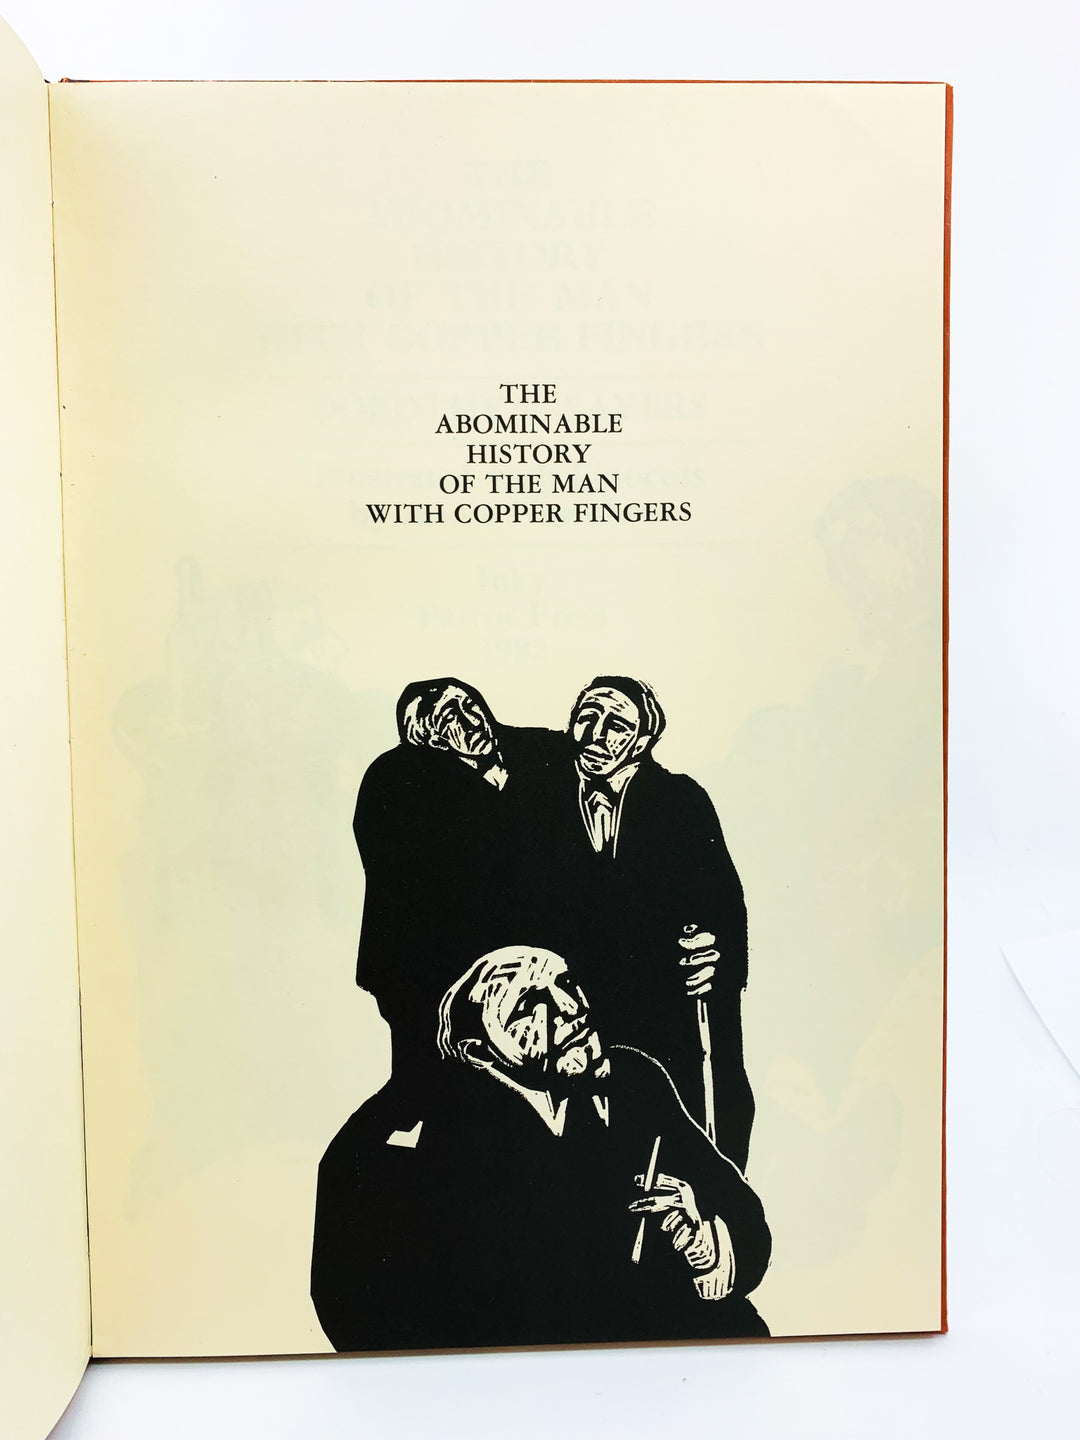 Sayers, Dorothy - The Abominable History of the Man with Copper Fingers - SIGNED | signature page